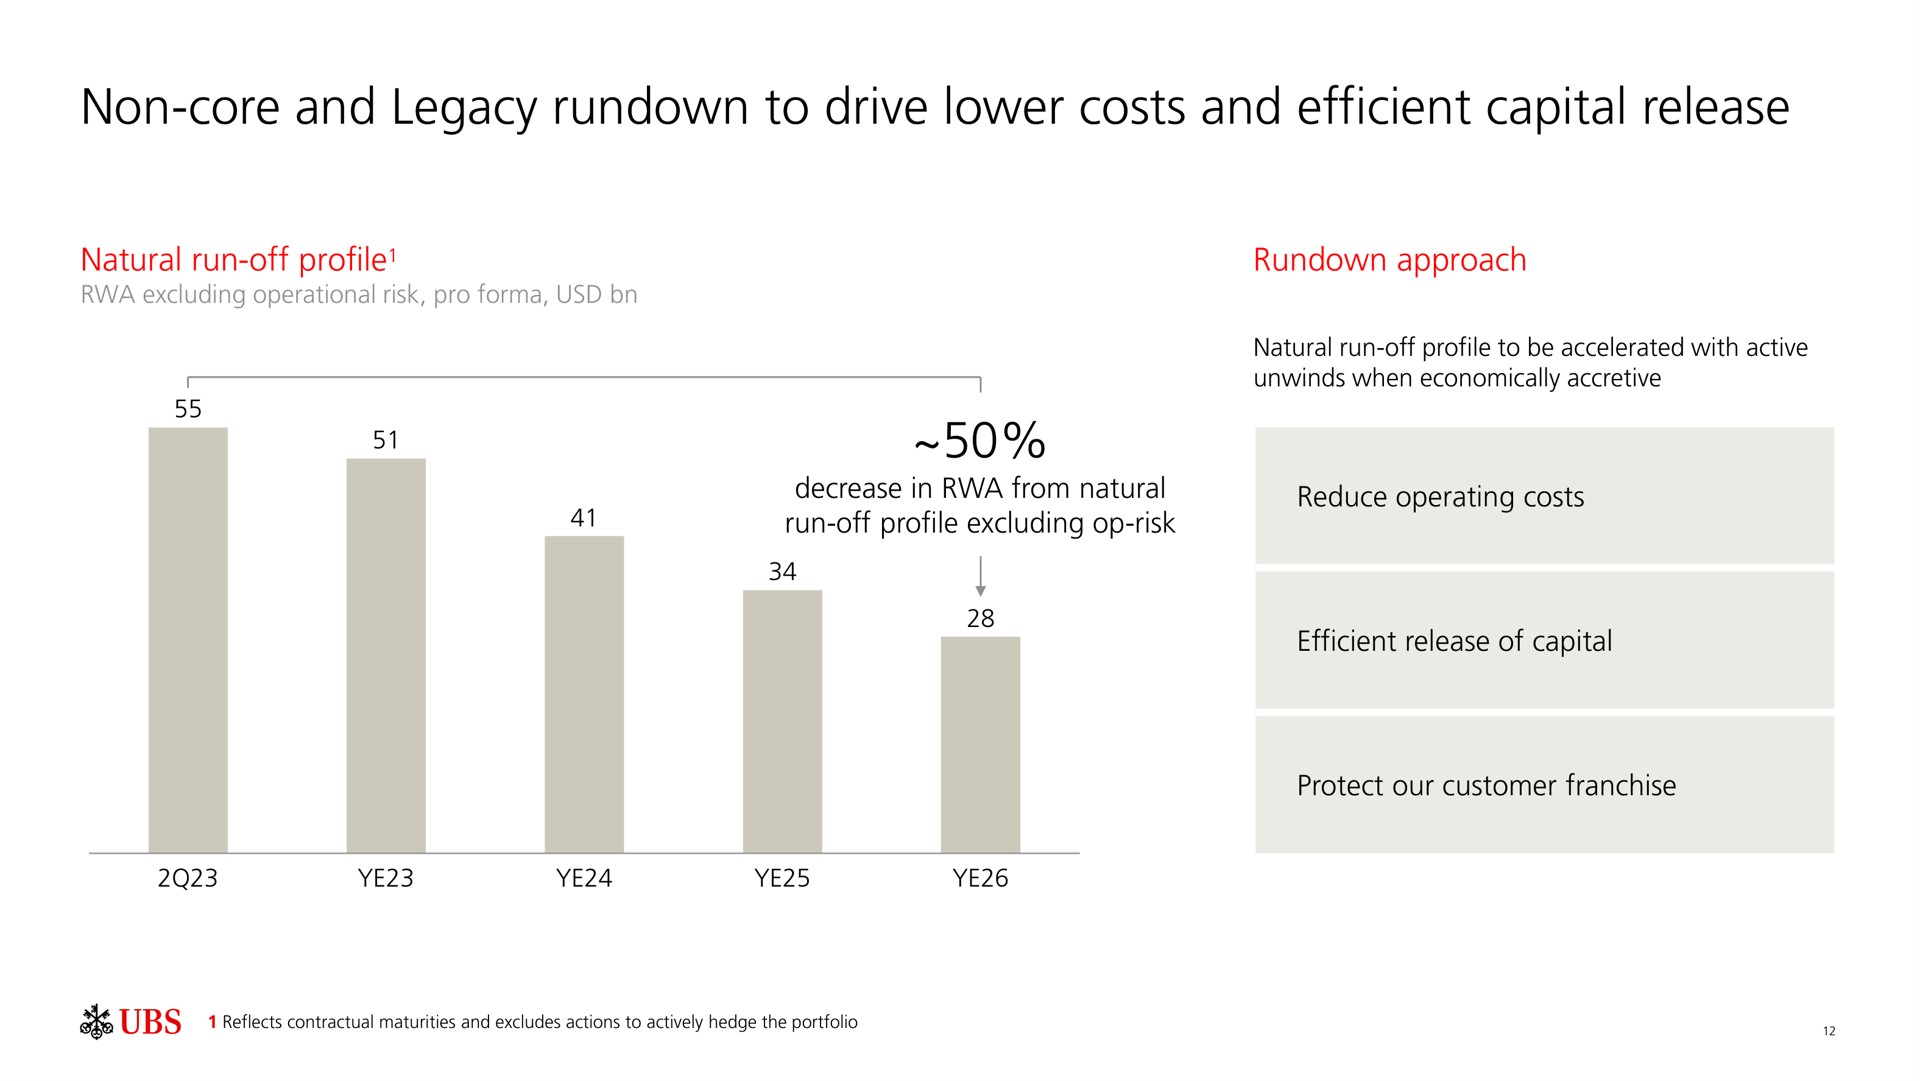 non core and legacy to drive lower costs and efficient capital release | UBS